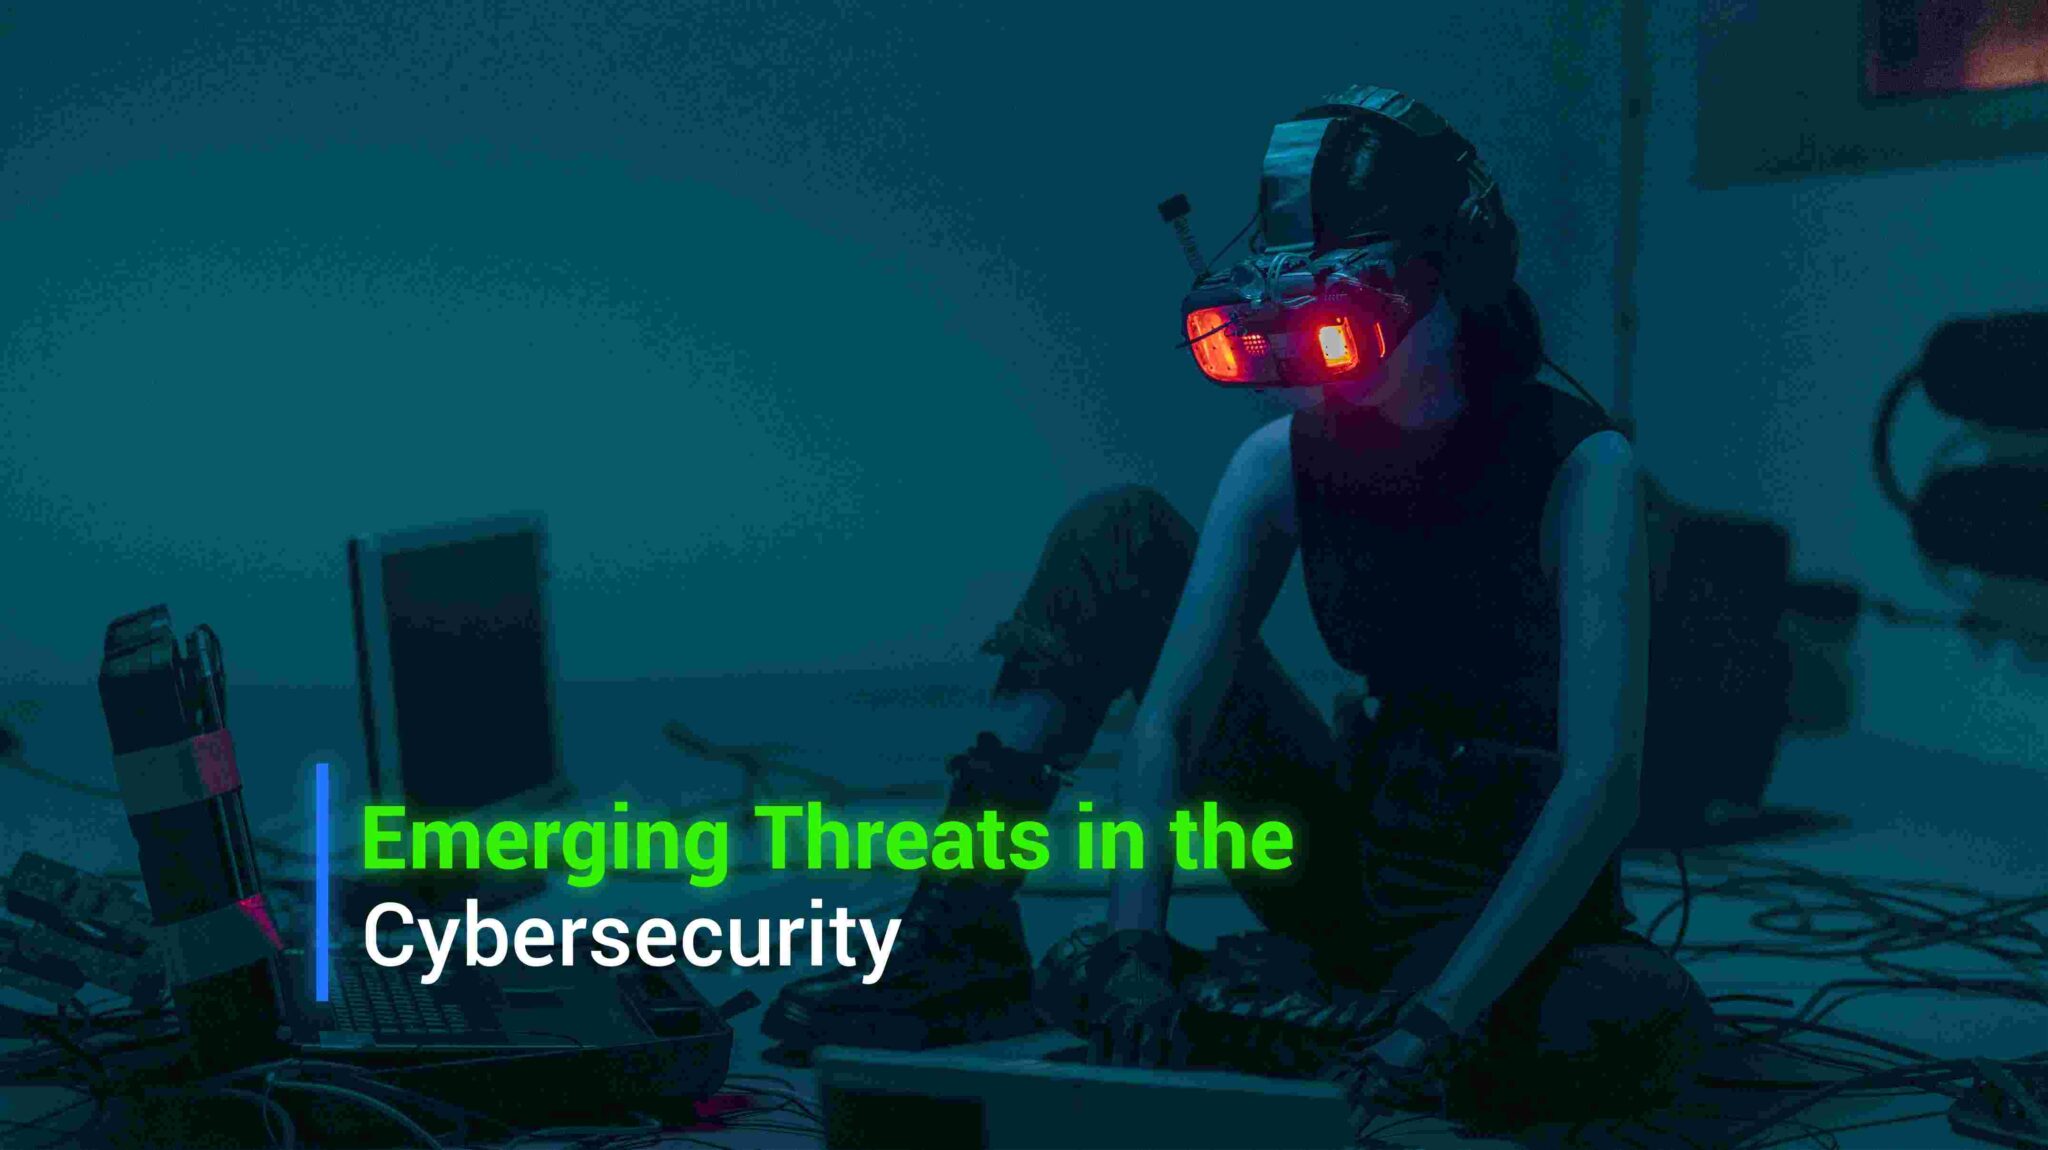 “Top 10 Emerging Threats in the Cybersecurity: A Look at the Latest Hacking Techniques in 2023”